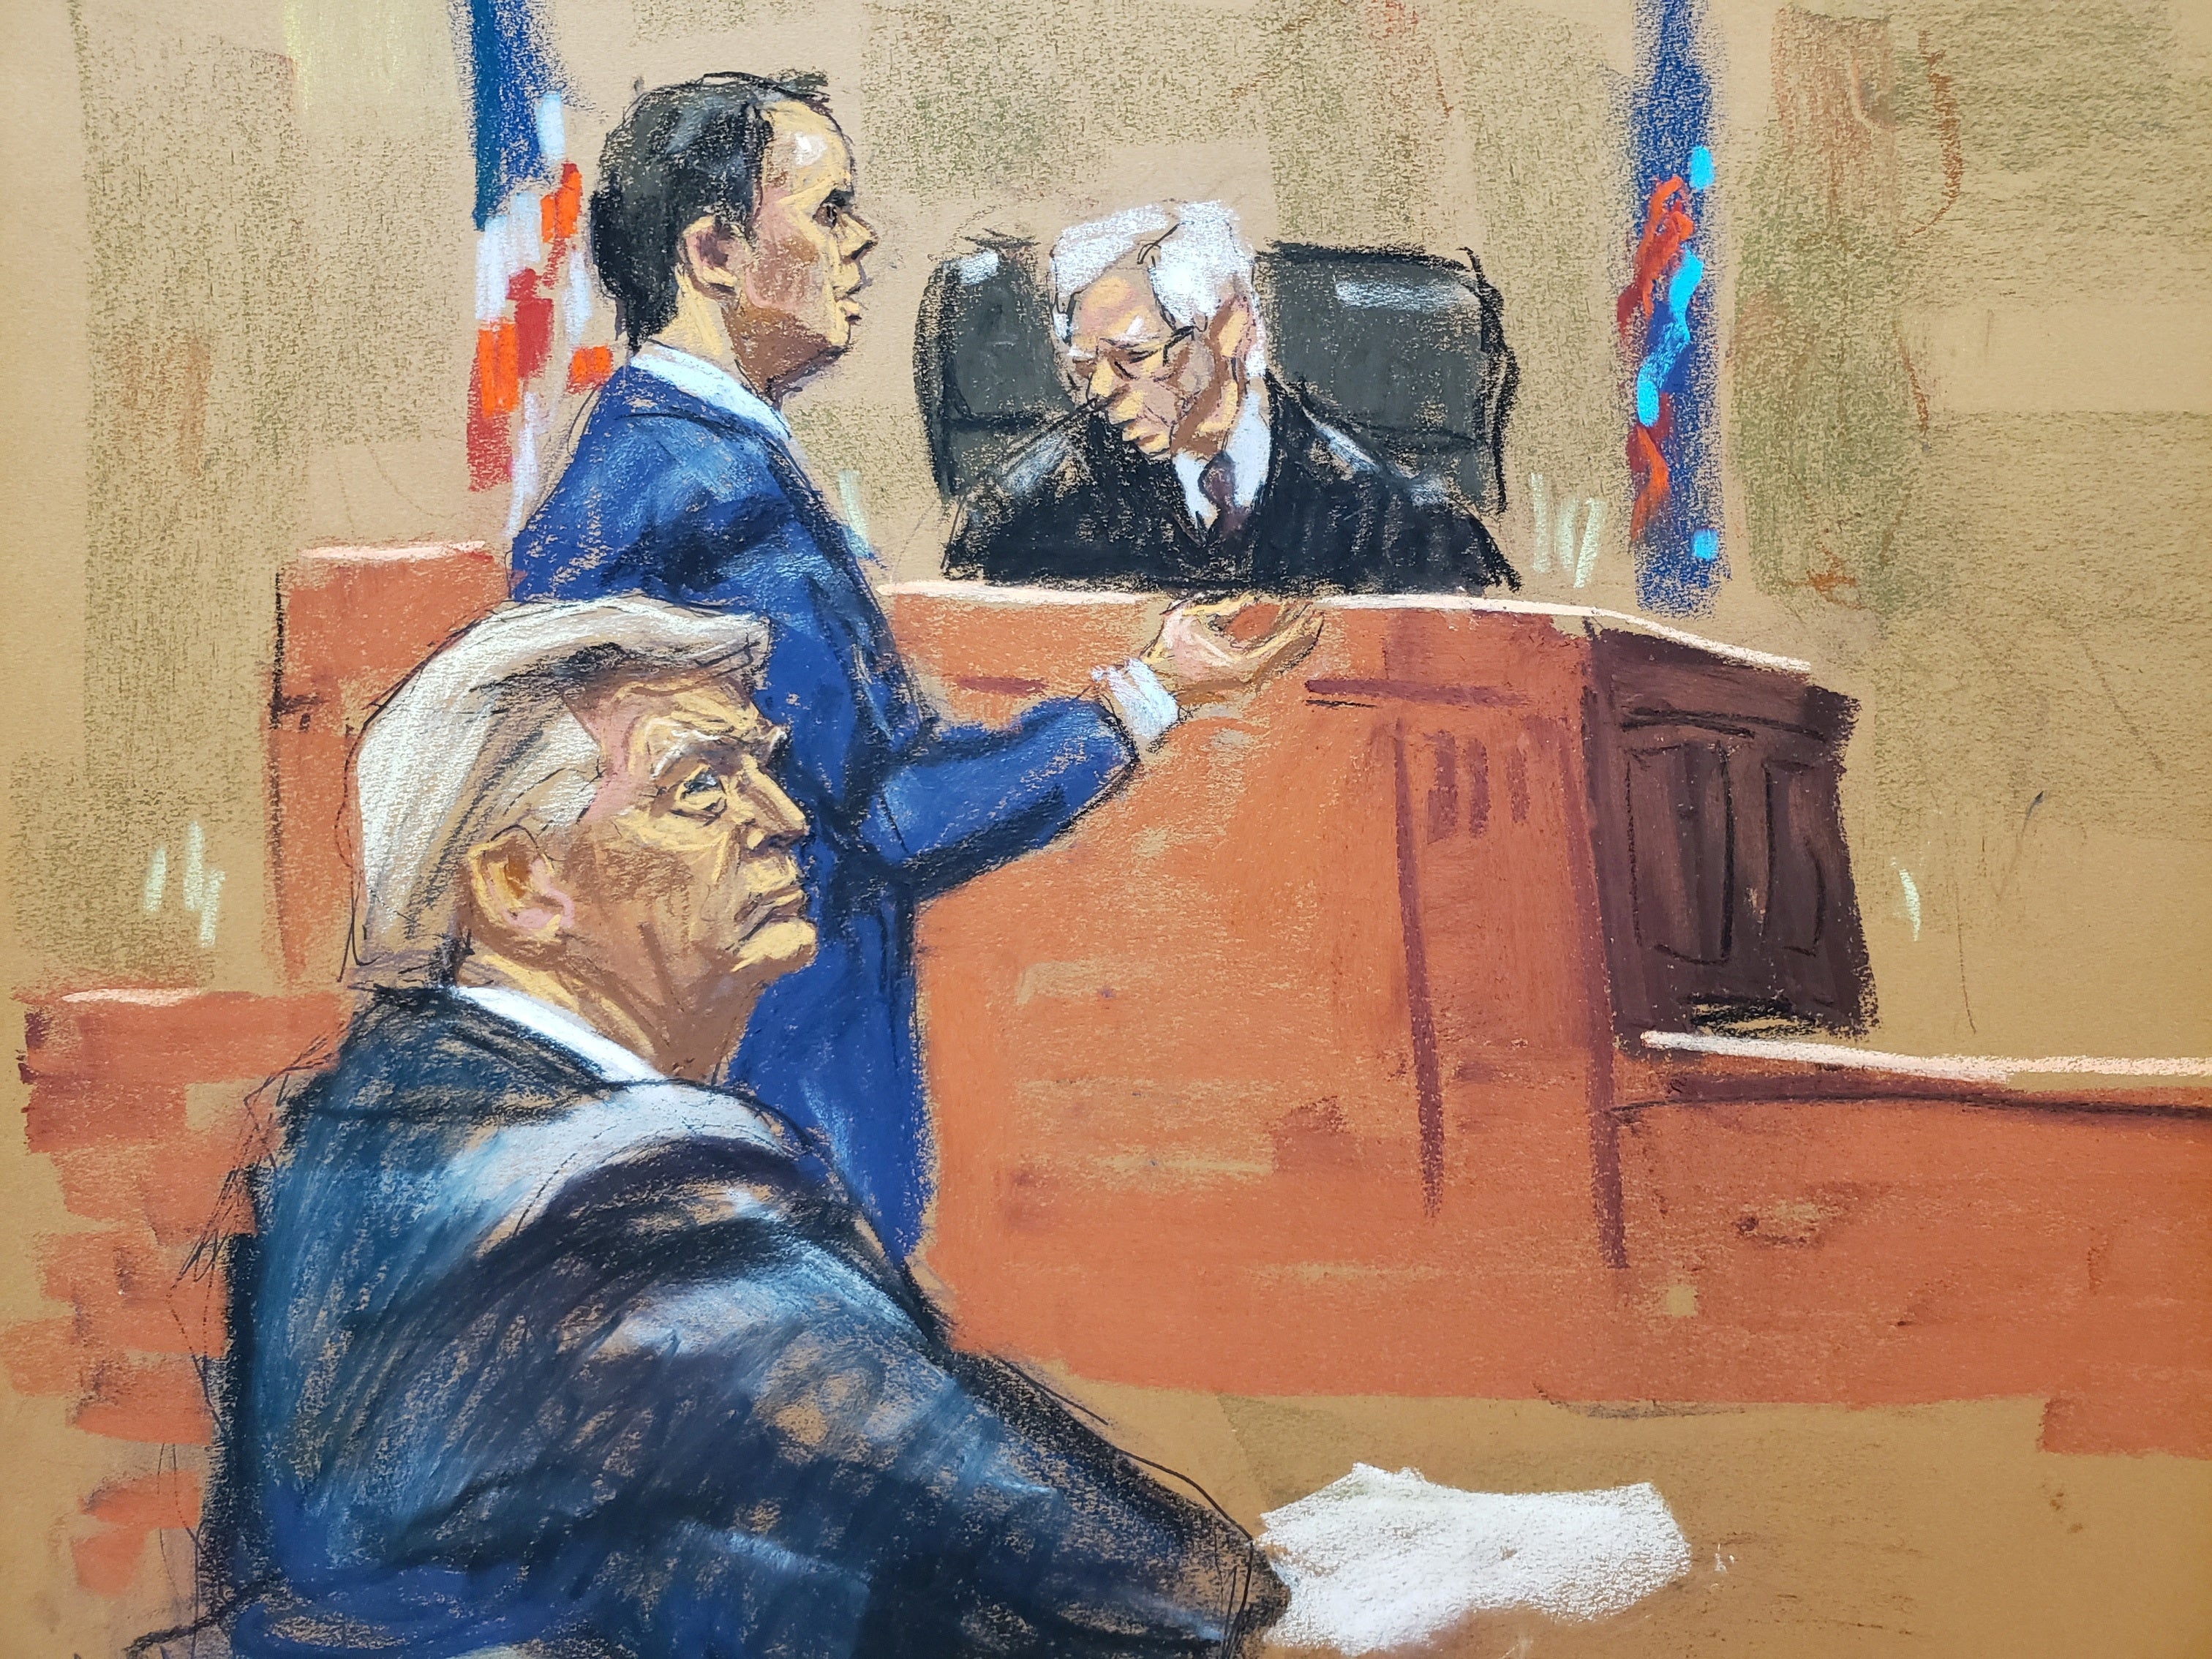 A courtroom sketch depicts Donald Trump sitting next to his attorney Christopher Kise as he speaks to Judge Arthur Engoron.